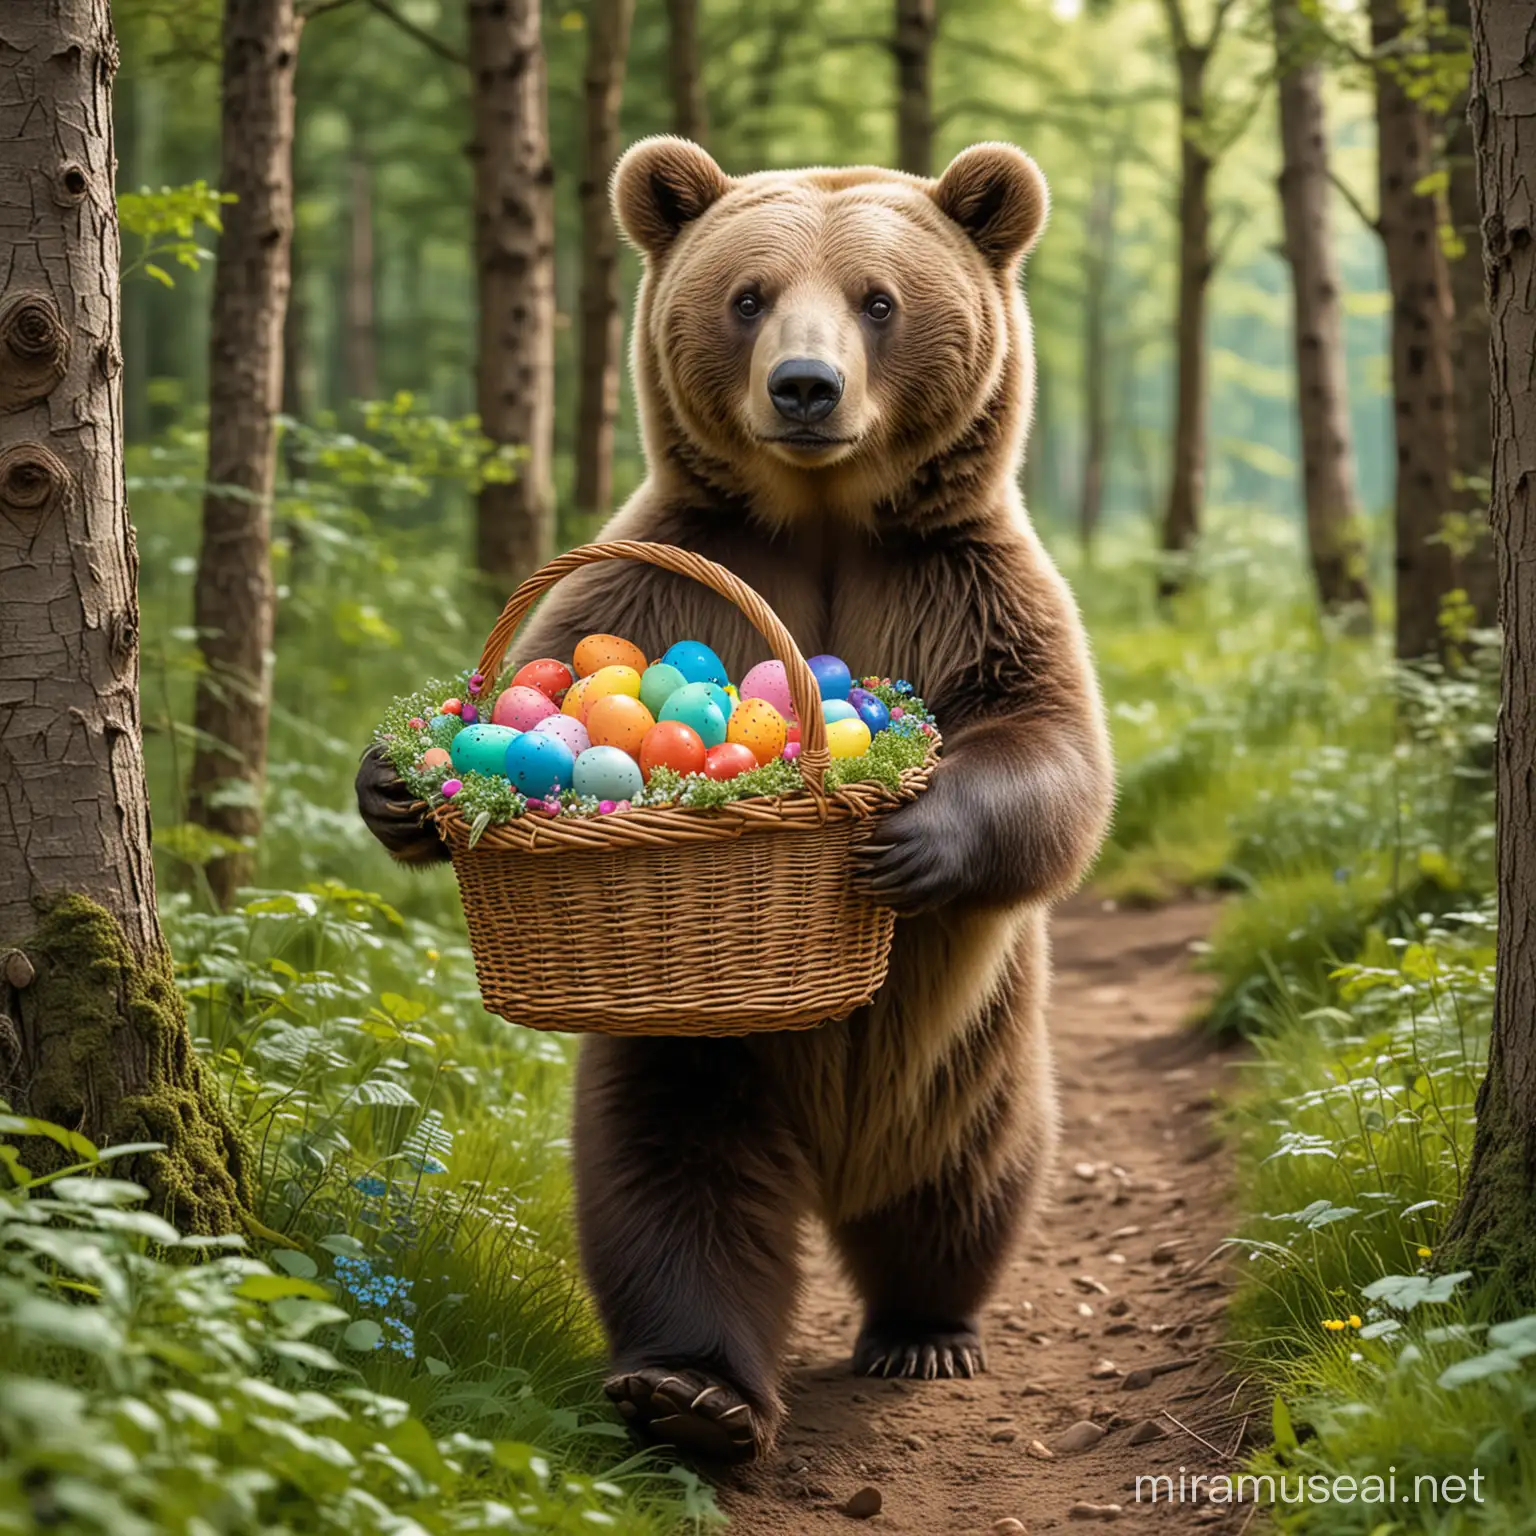 A friendly bear carrying basket with colorfull eggs going through the green forrest.